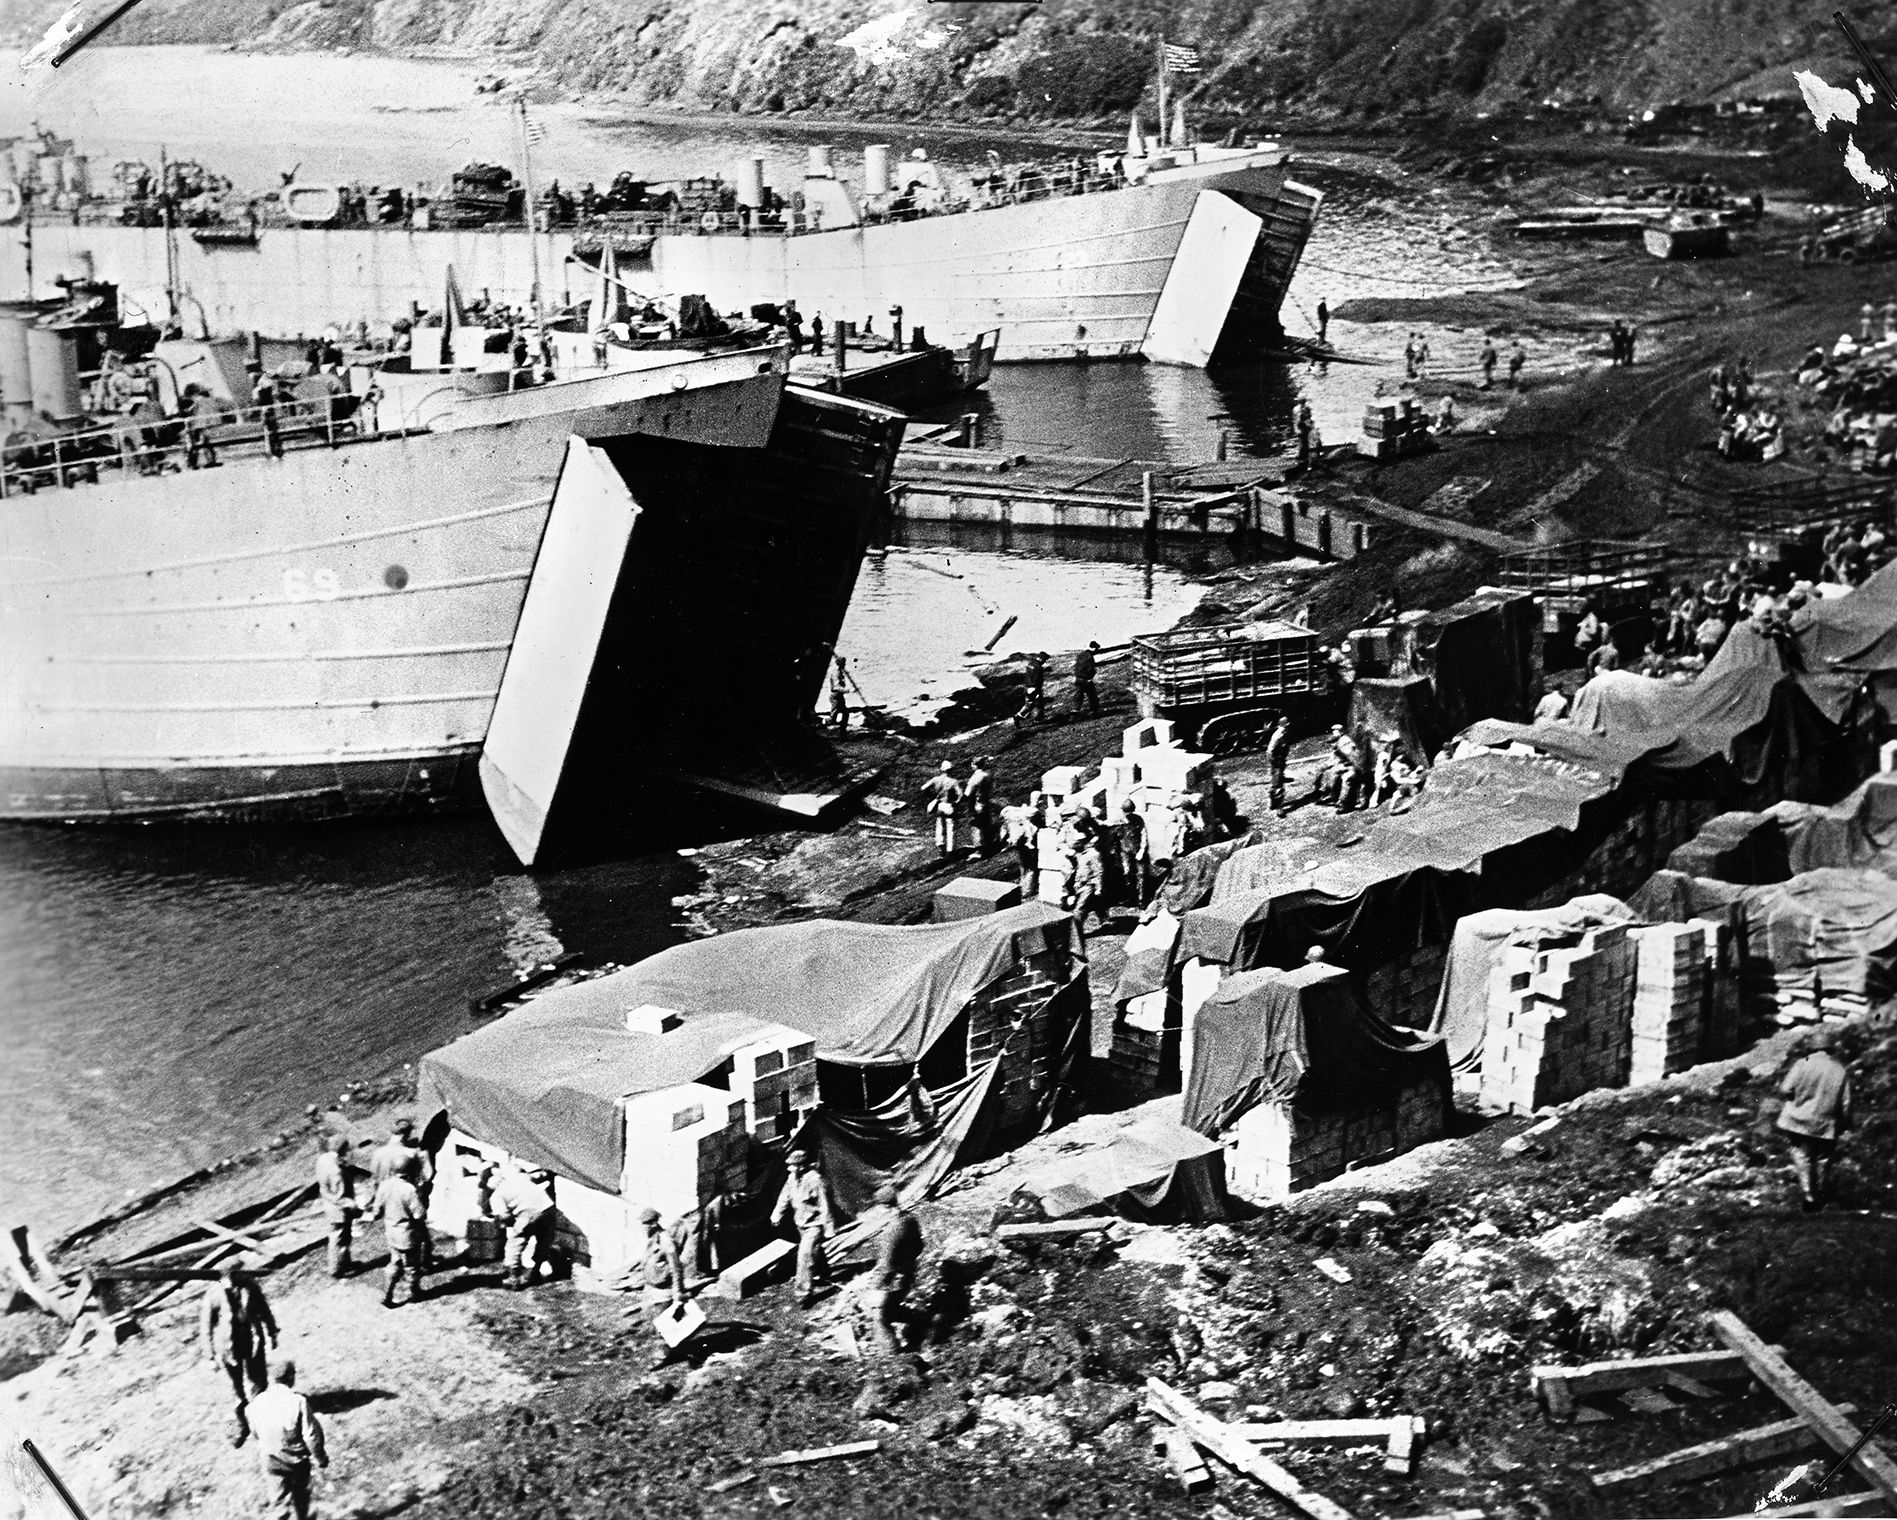 Coast Guardsmen and soldiers of the U.S. Army unload equipment and supplies on a beach in support of Allied landings. Note the large swinging doors of the LSTs (Landing Ship, Tank), which allowed the vessels to transport heavy loads, including tanks and other armored vehicles.